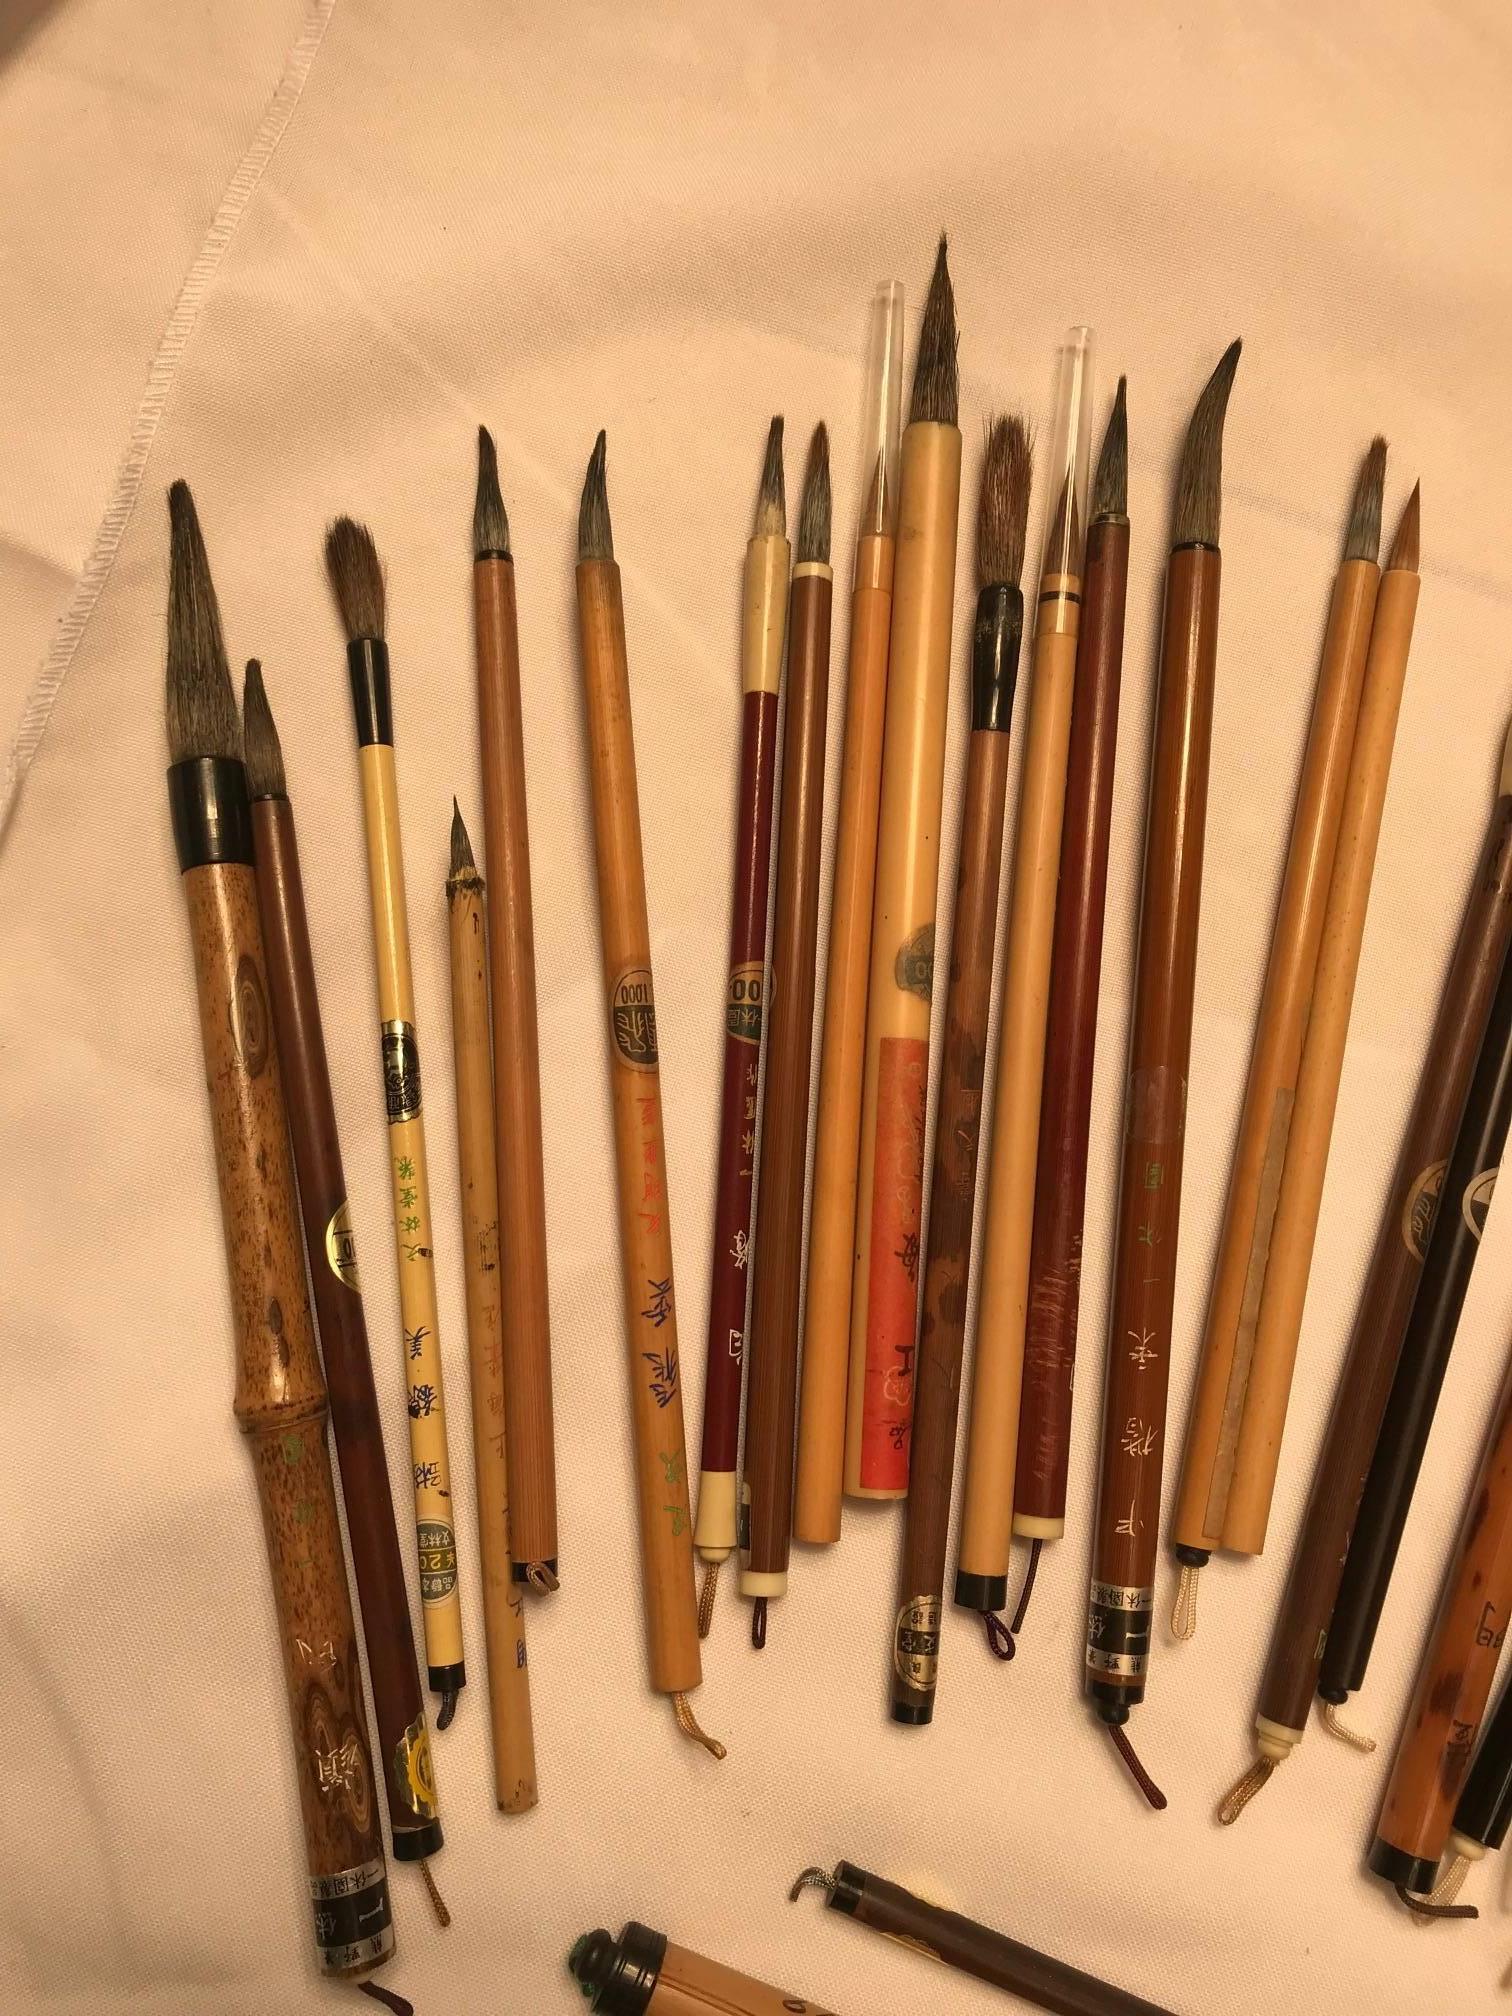 Hand-Crafted Artisan's Cache of 35 Old Chinese Paint Calligraphy Bamboo Brushes